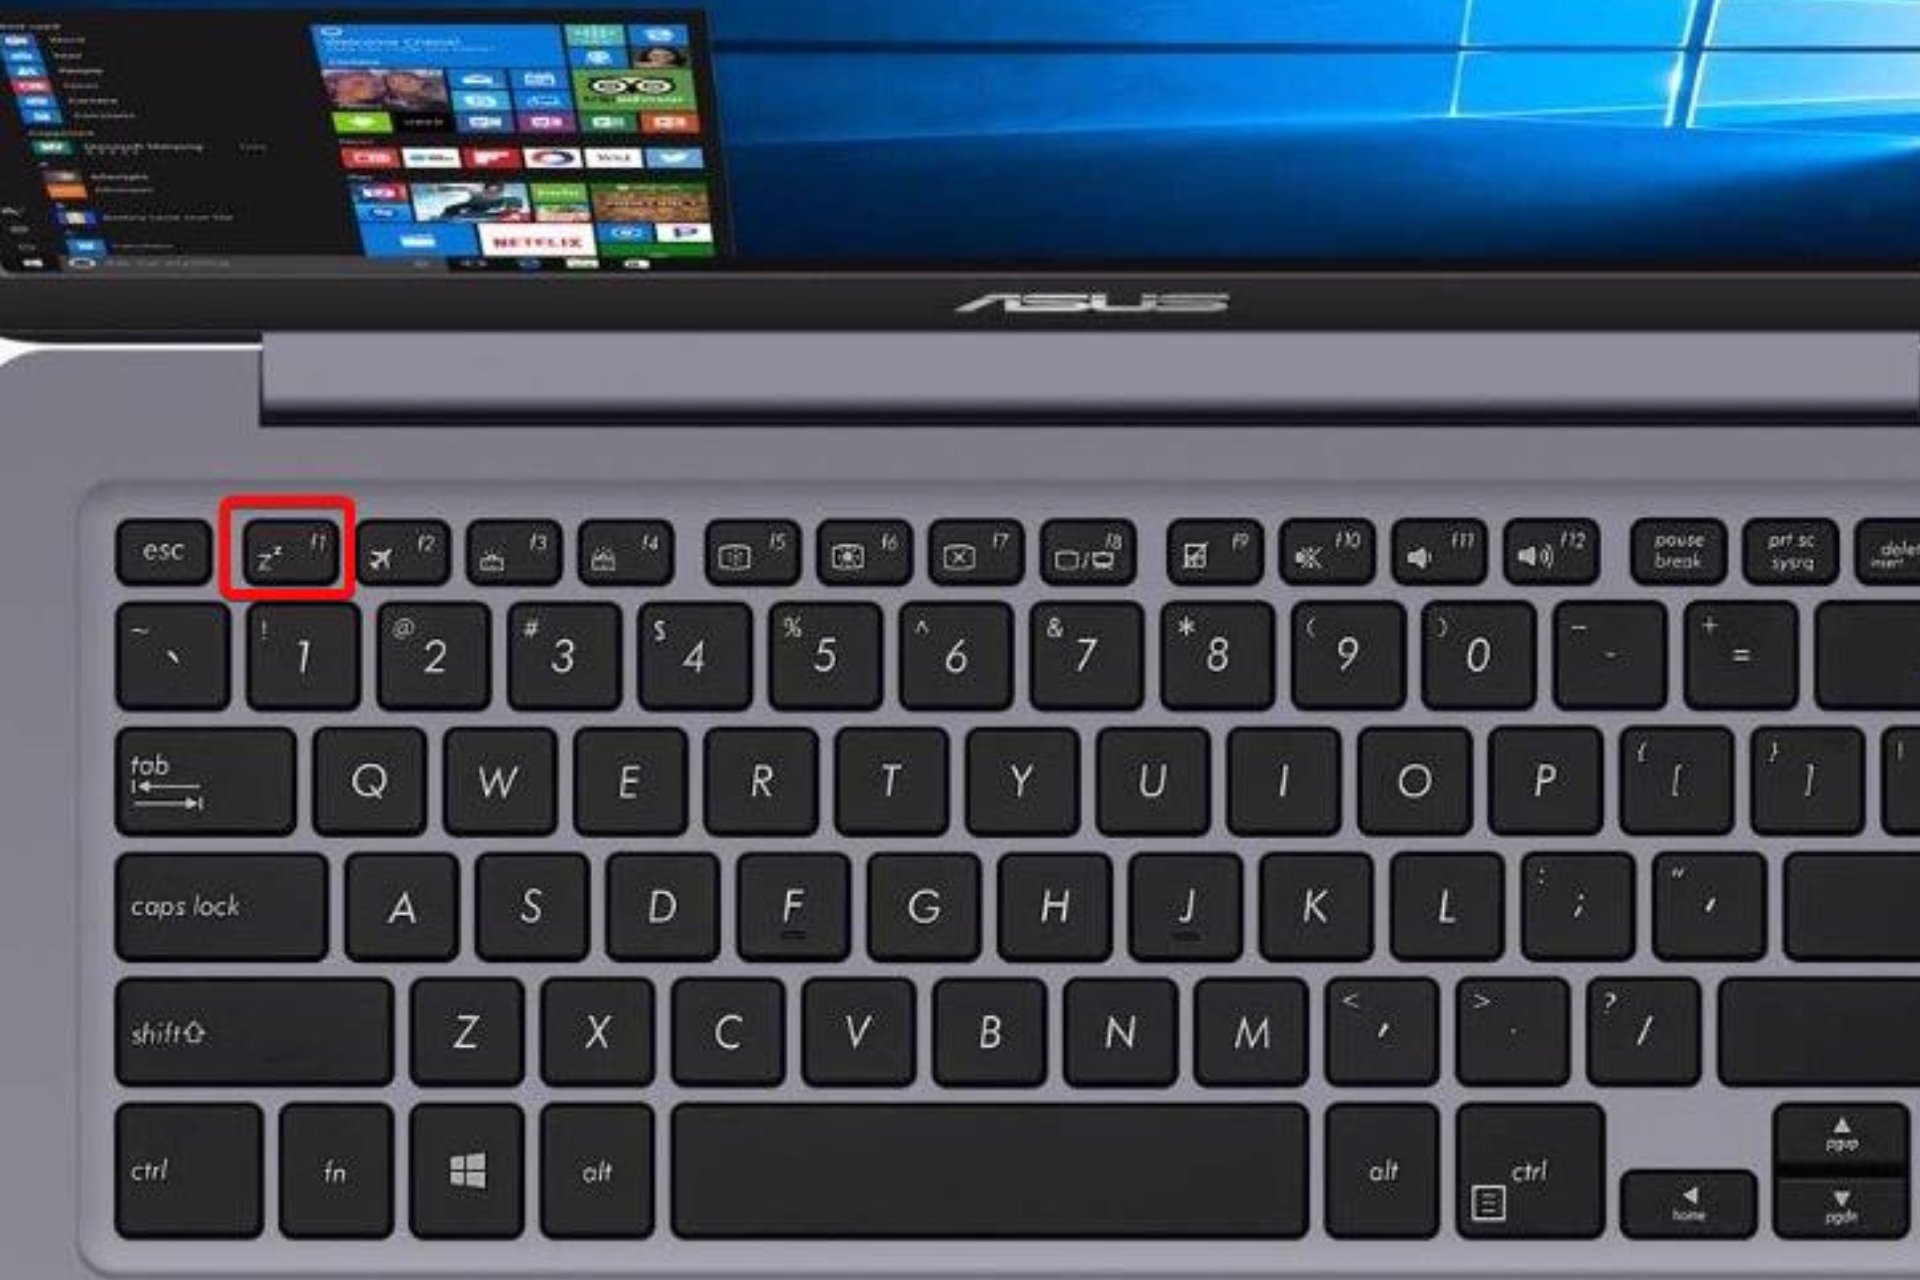 How to Easily Find the Sleep Button on a Windows Laptop